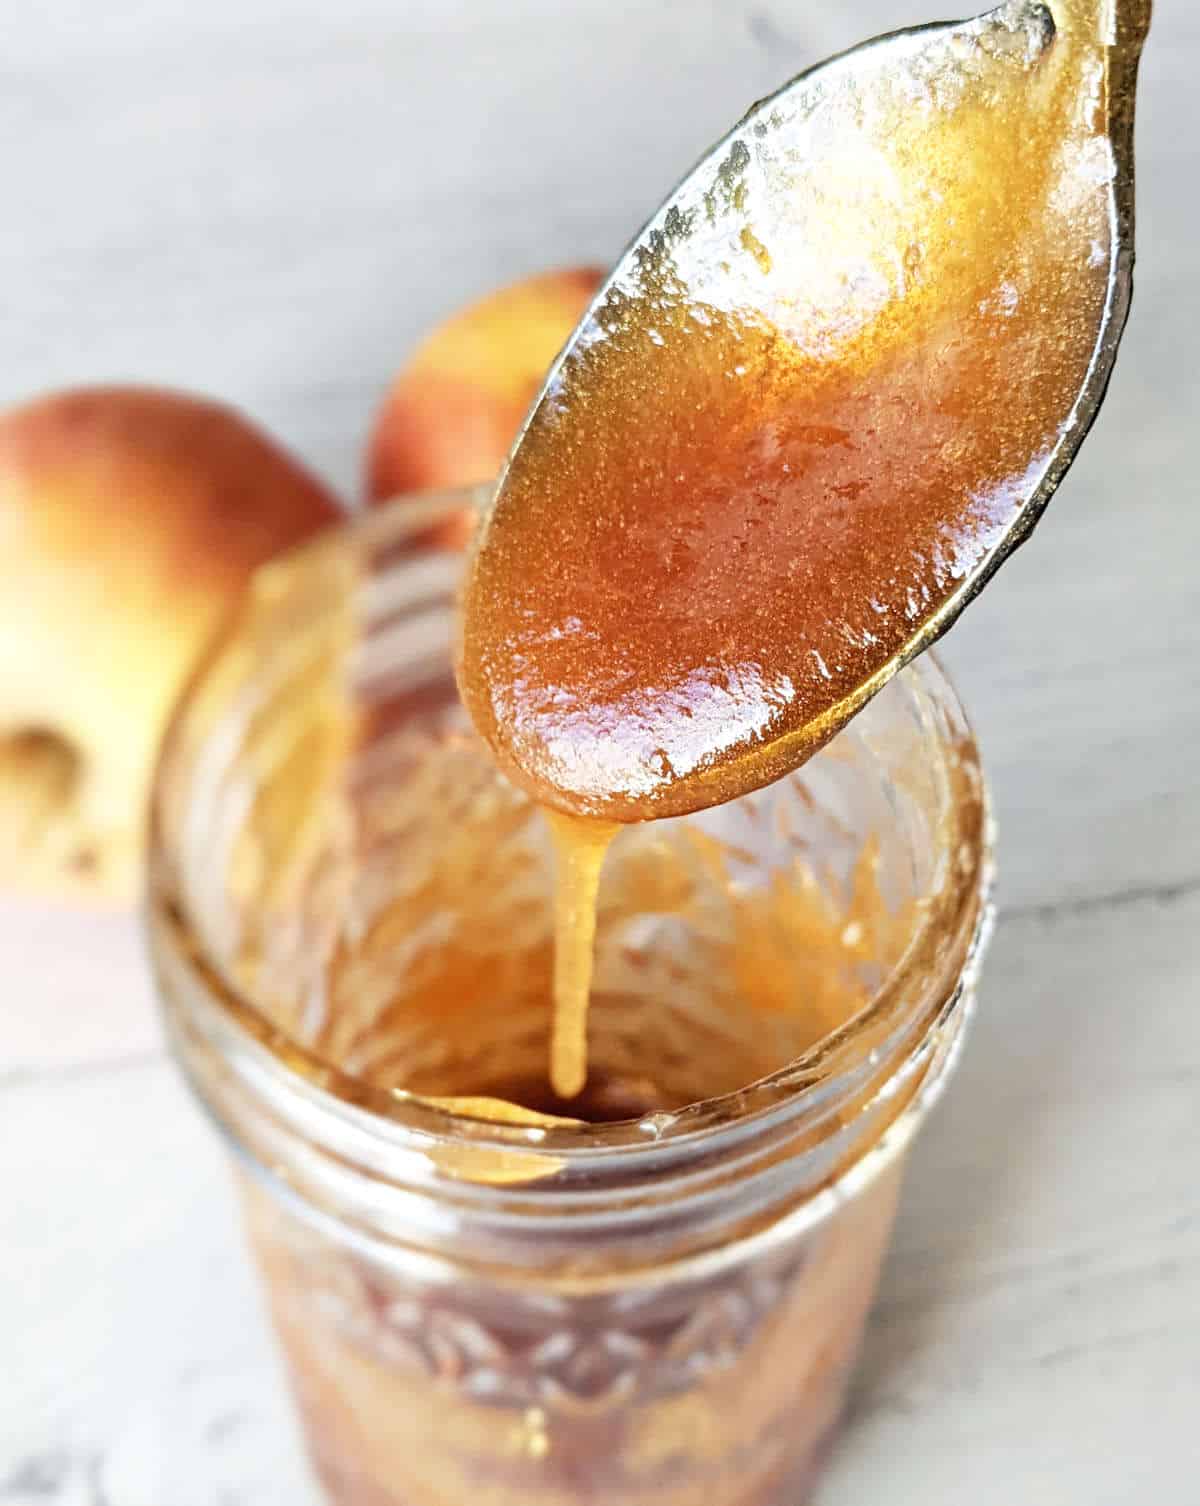 Apple honey dripping off a spoon.